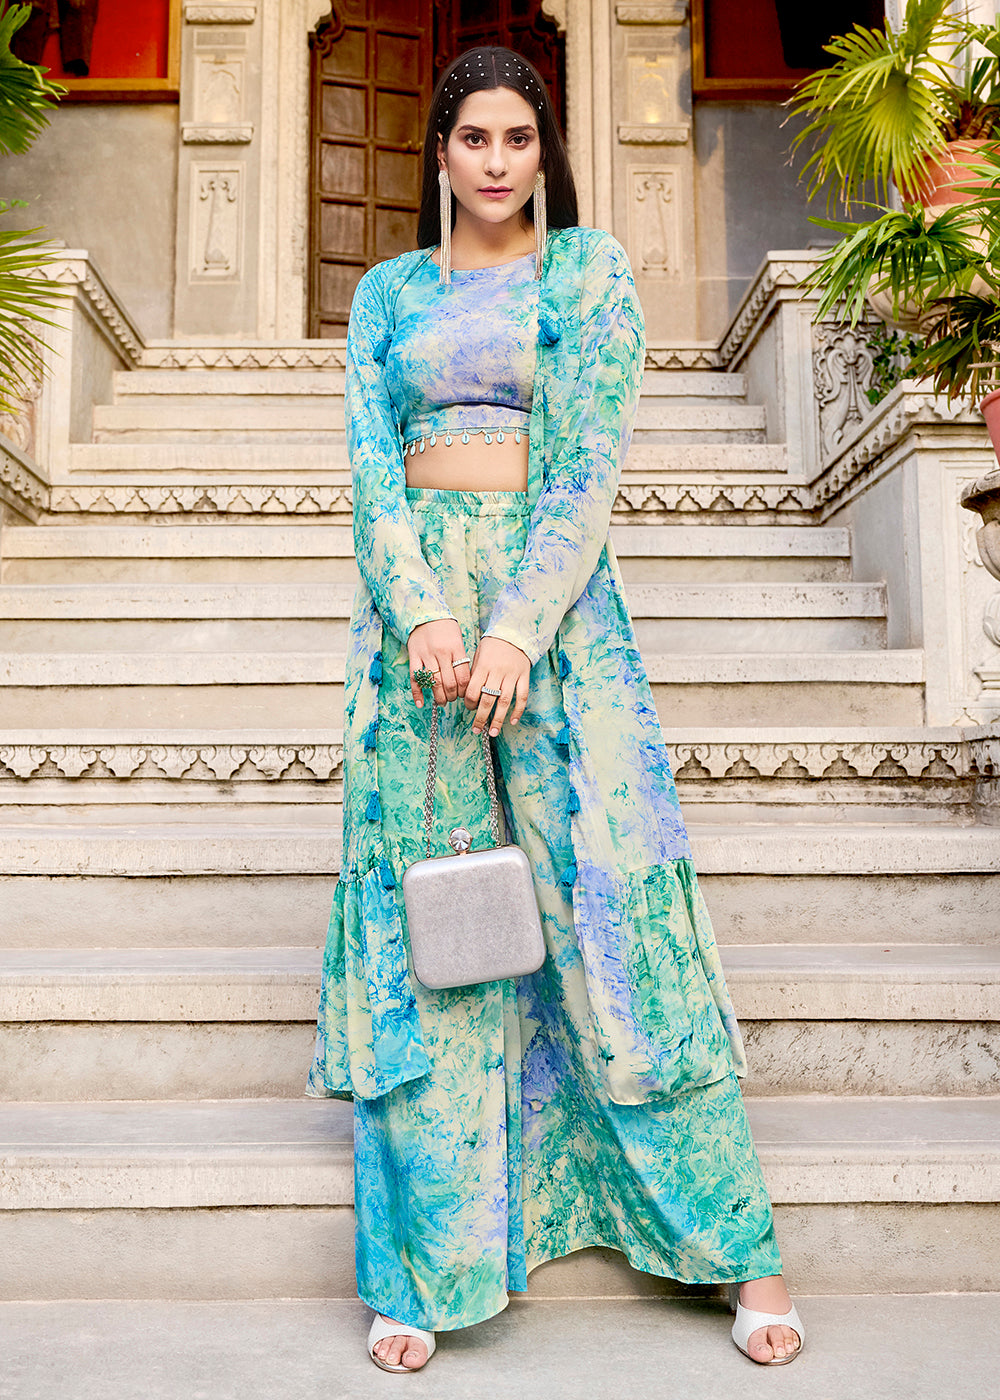 Buy Now Charming Sky Blue Printed Koti Style Co-Ords Indo-Western Suit Online in USA, UK, Canada, Germany, Australia & Worldwide at Empress Clothing.